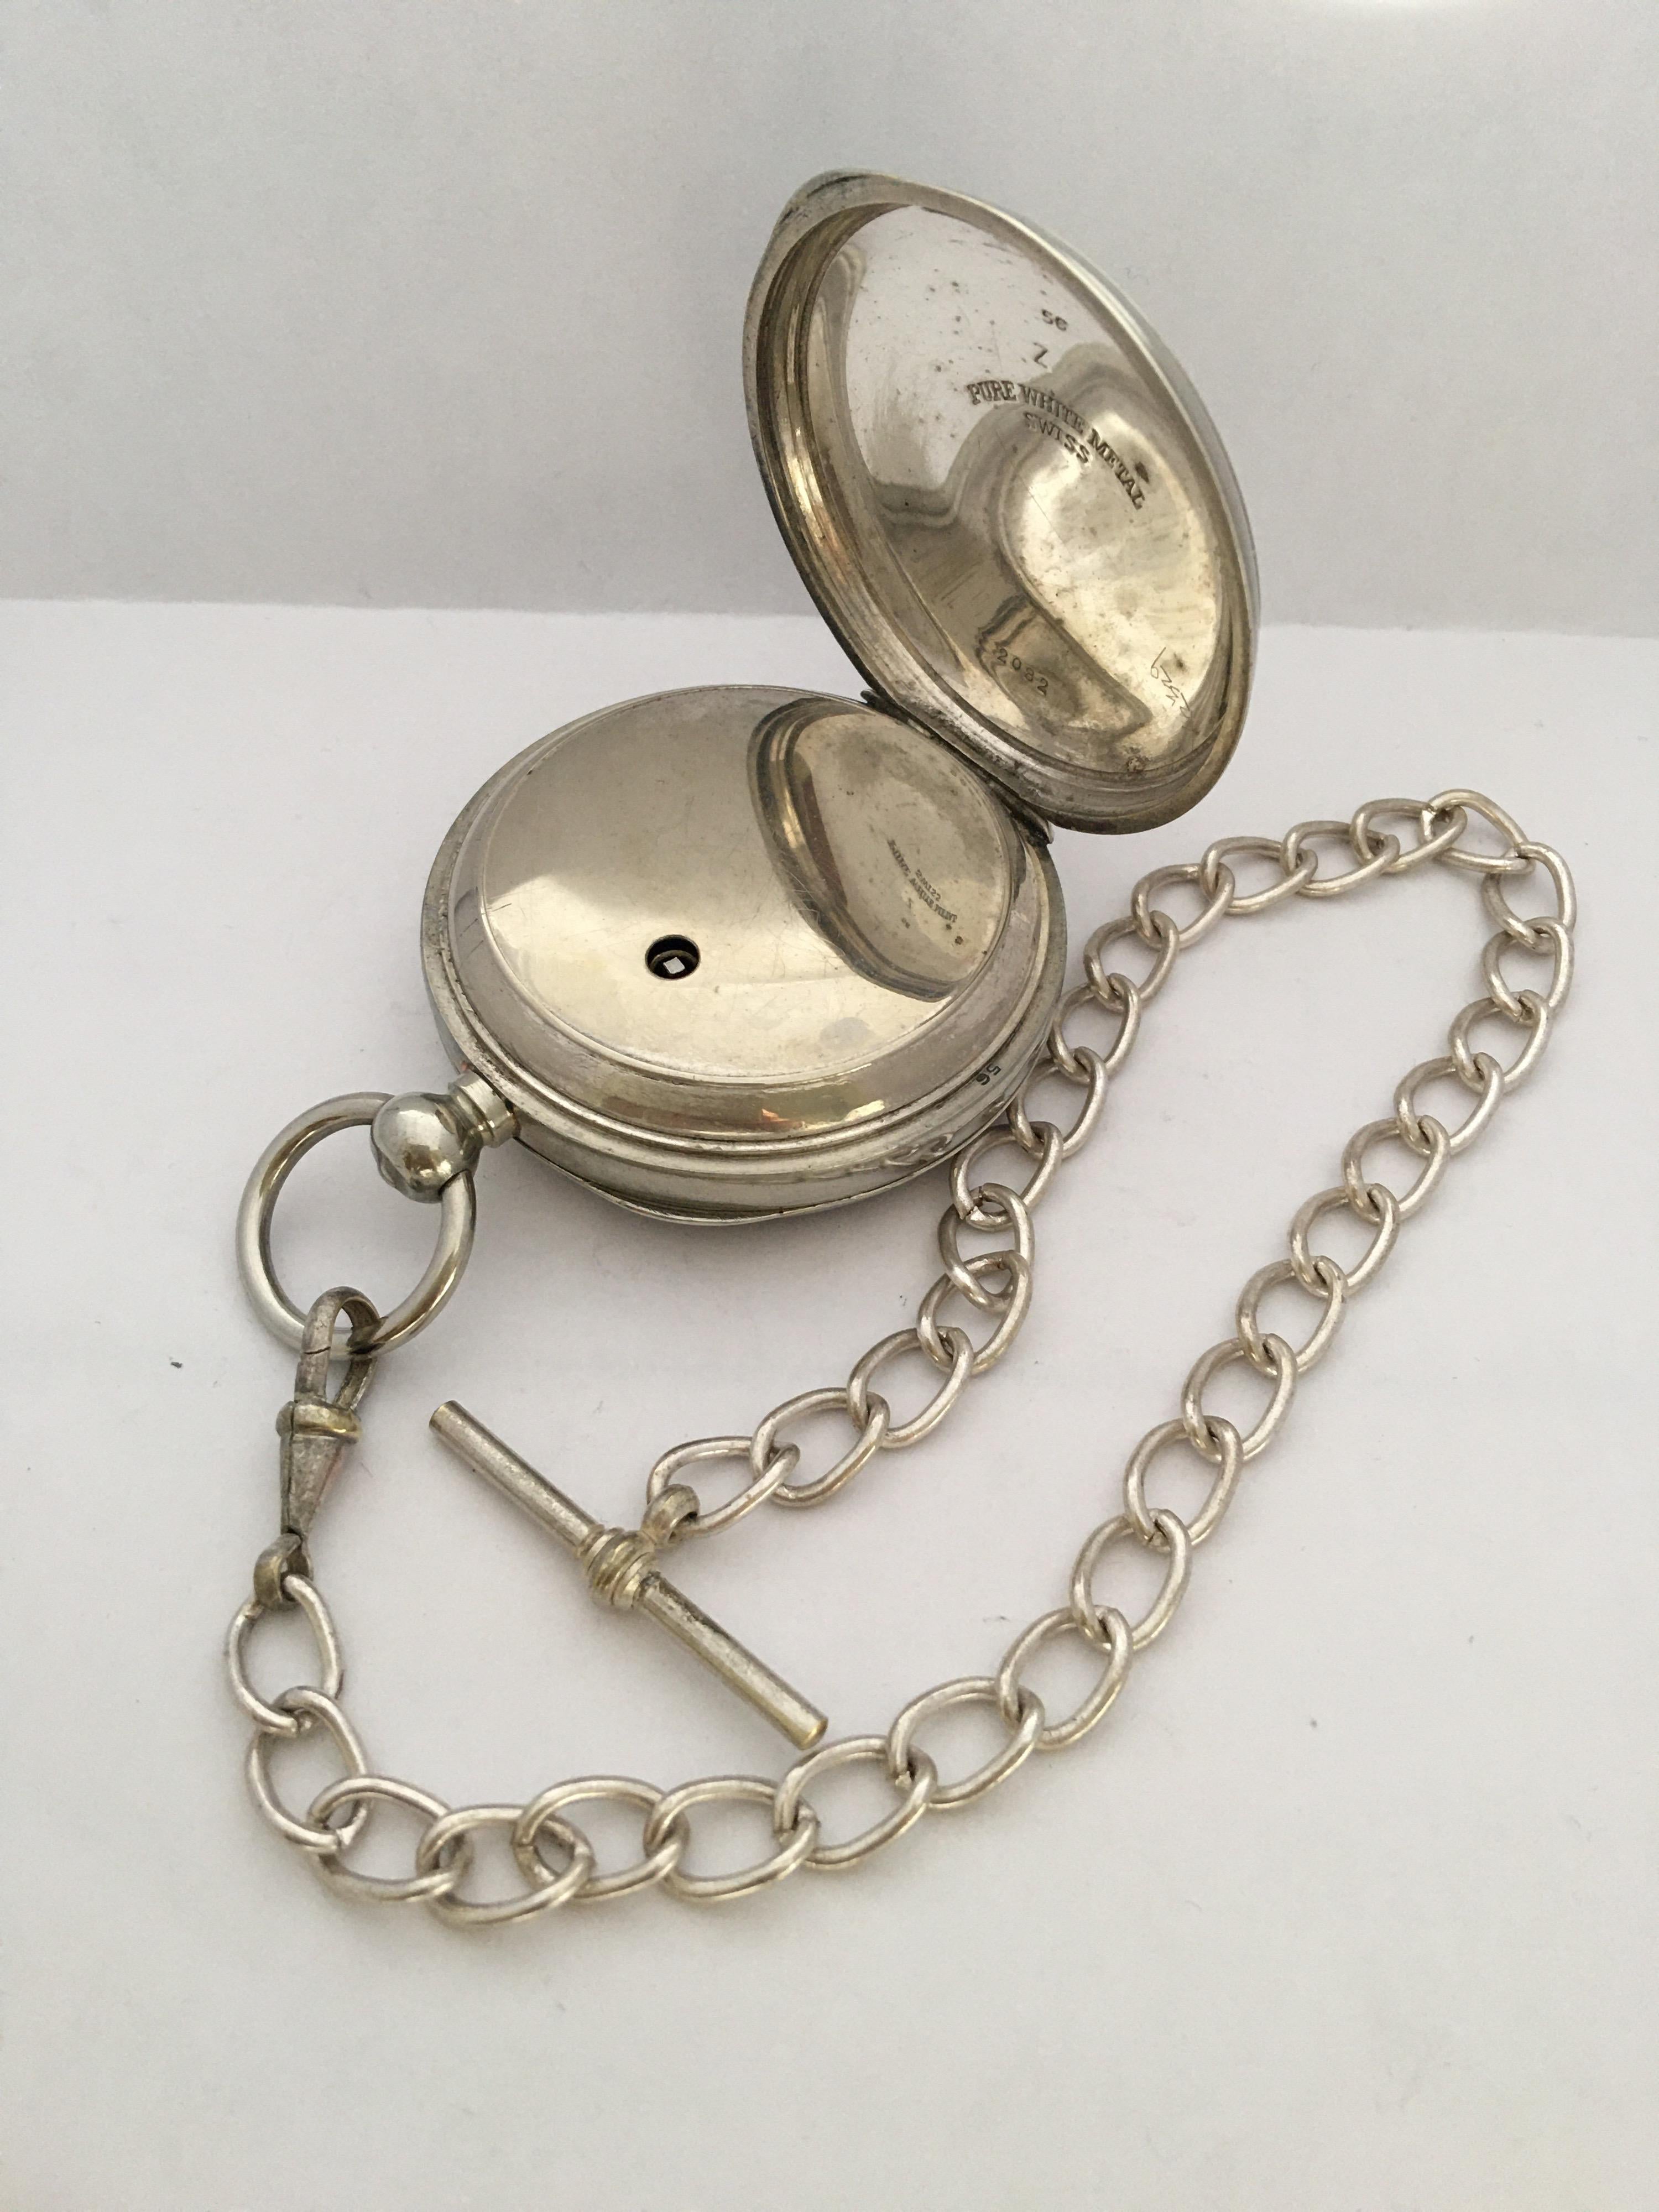 Antique Silver Plated Key-Winding Pocket Watch with a Chain 4